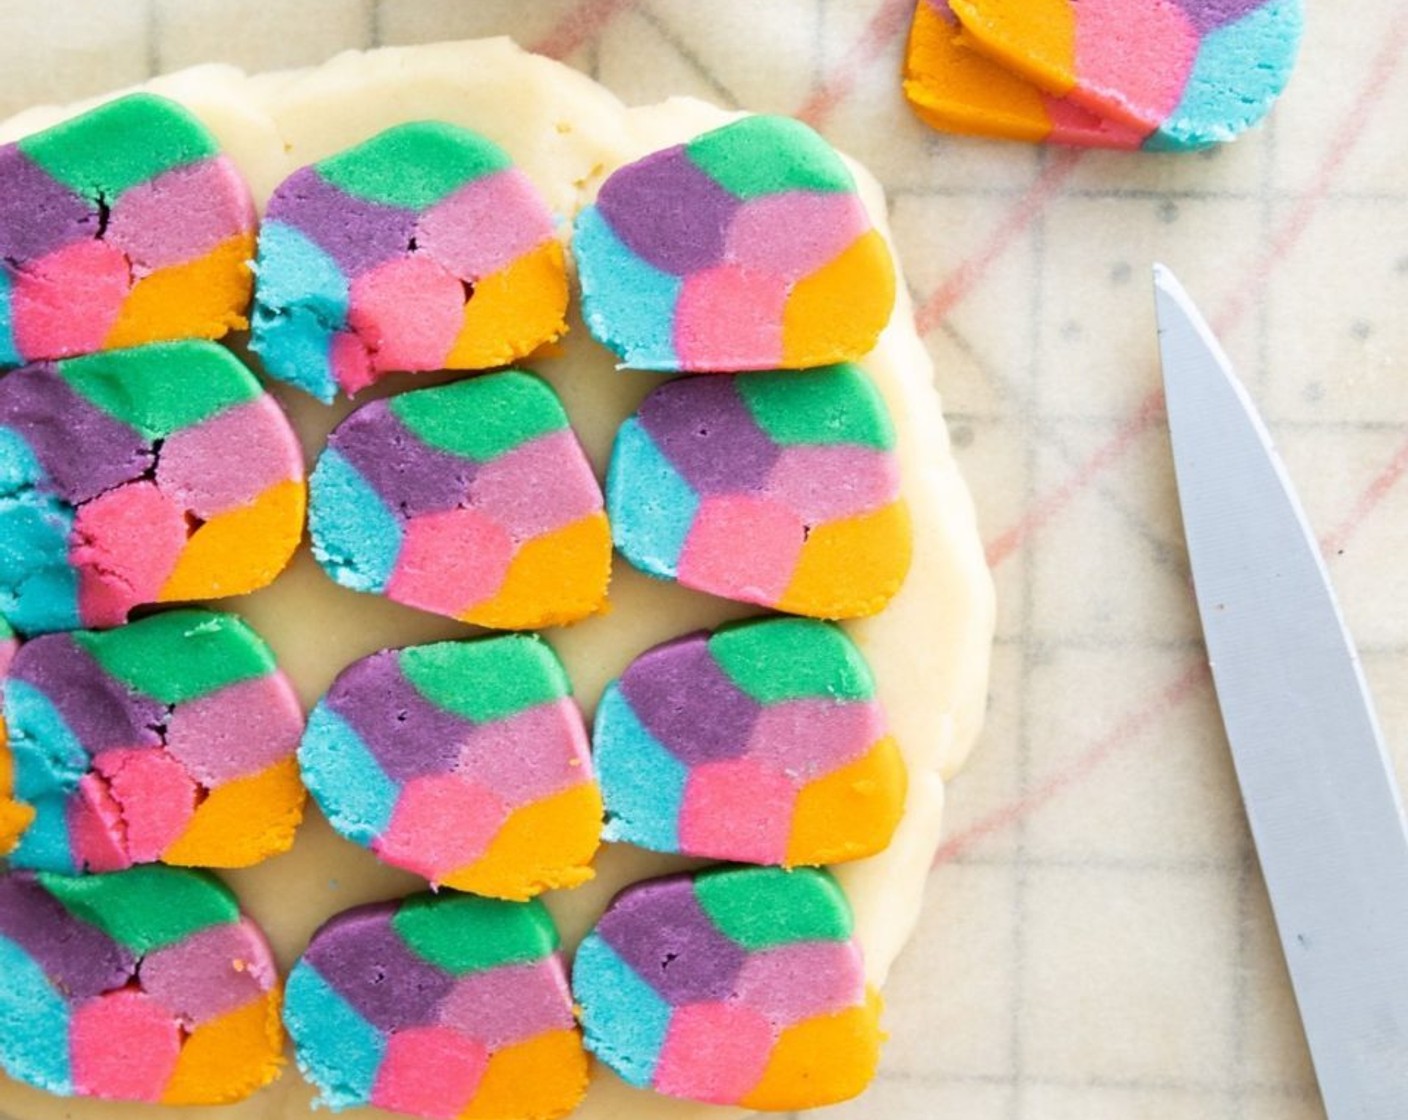 step 10 Slice the colored cookie dough log into 1/8-inch slices and place them on top of the uncolored dough, like tiles. If there are any large gaps between the slabs of colored dough, use the extra dough to fill in the space.